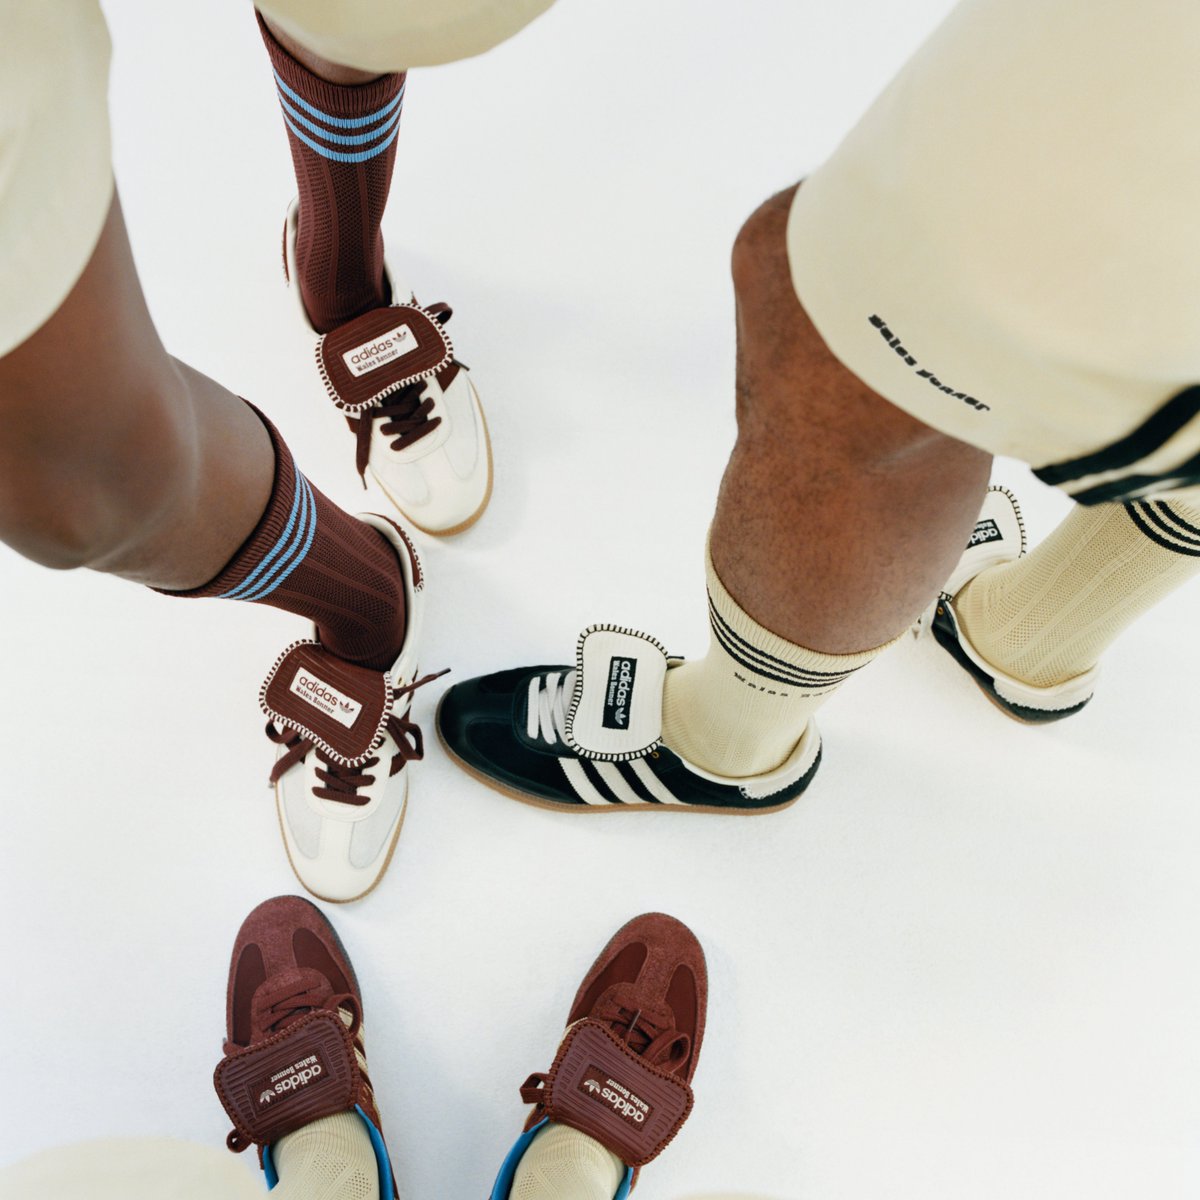 The striking elegance of sportswear. ​ adidas sporting legacy is reimagined through unique interpretations of archival pieces.​ adidas Originals by Wales Bonner is available now on CONFIRMED, adidas.com/wales_bonner and select stores